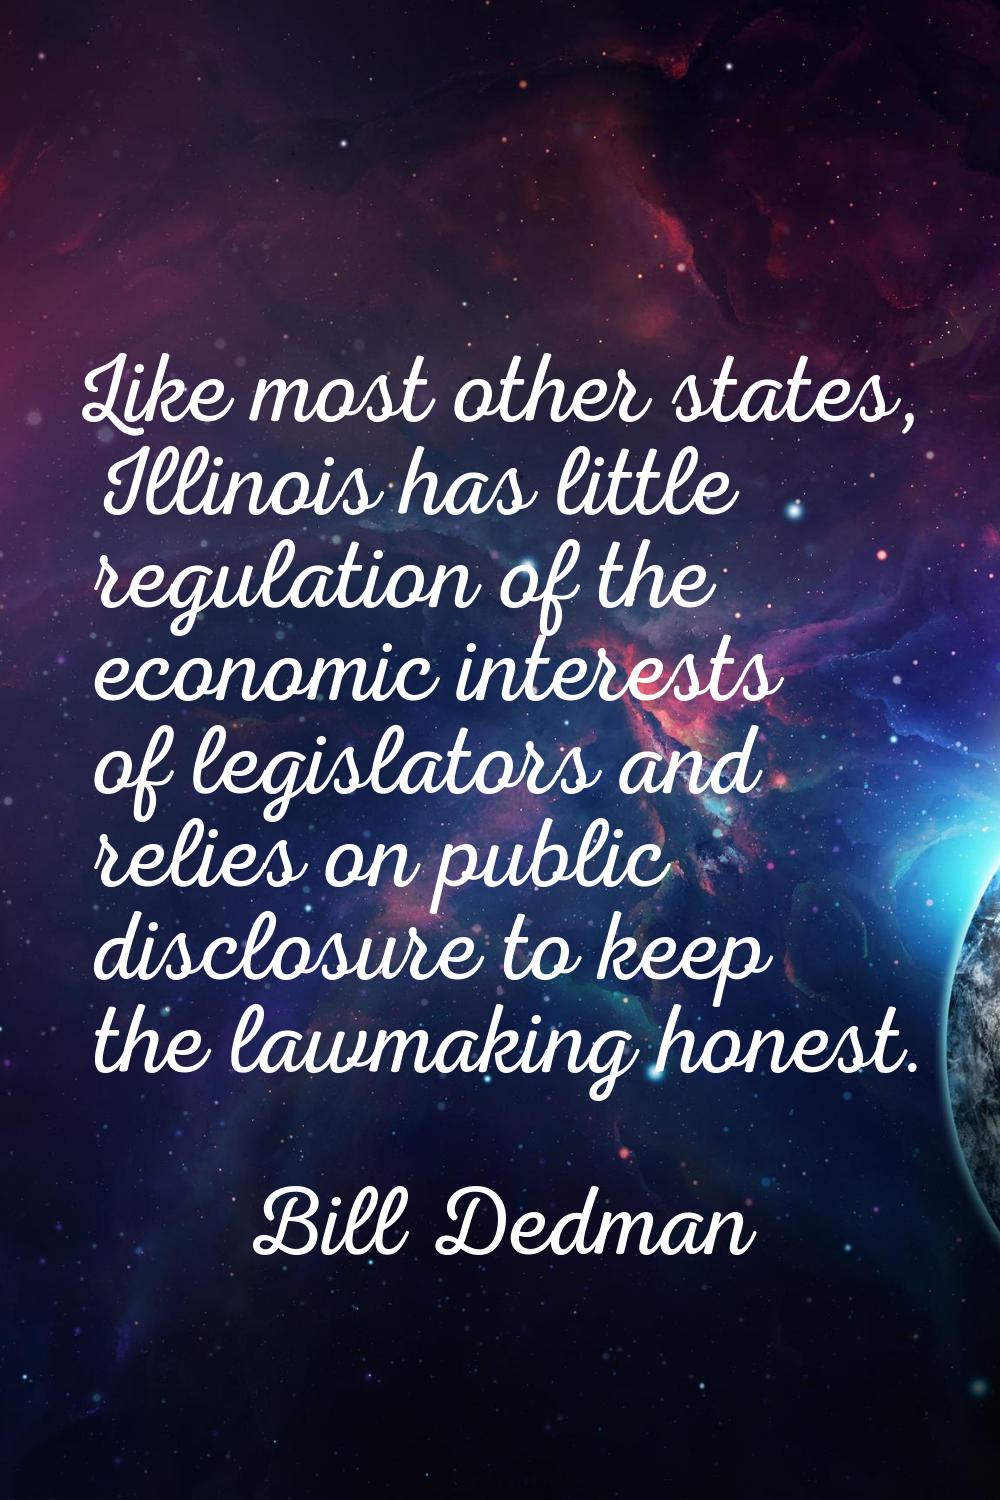 Like most other states, Illinois has little regulation of the economic interests of legislators and